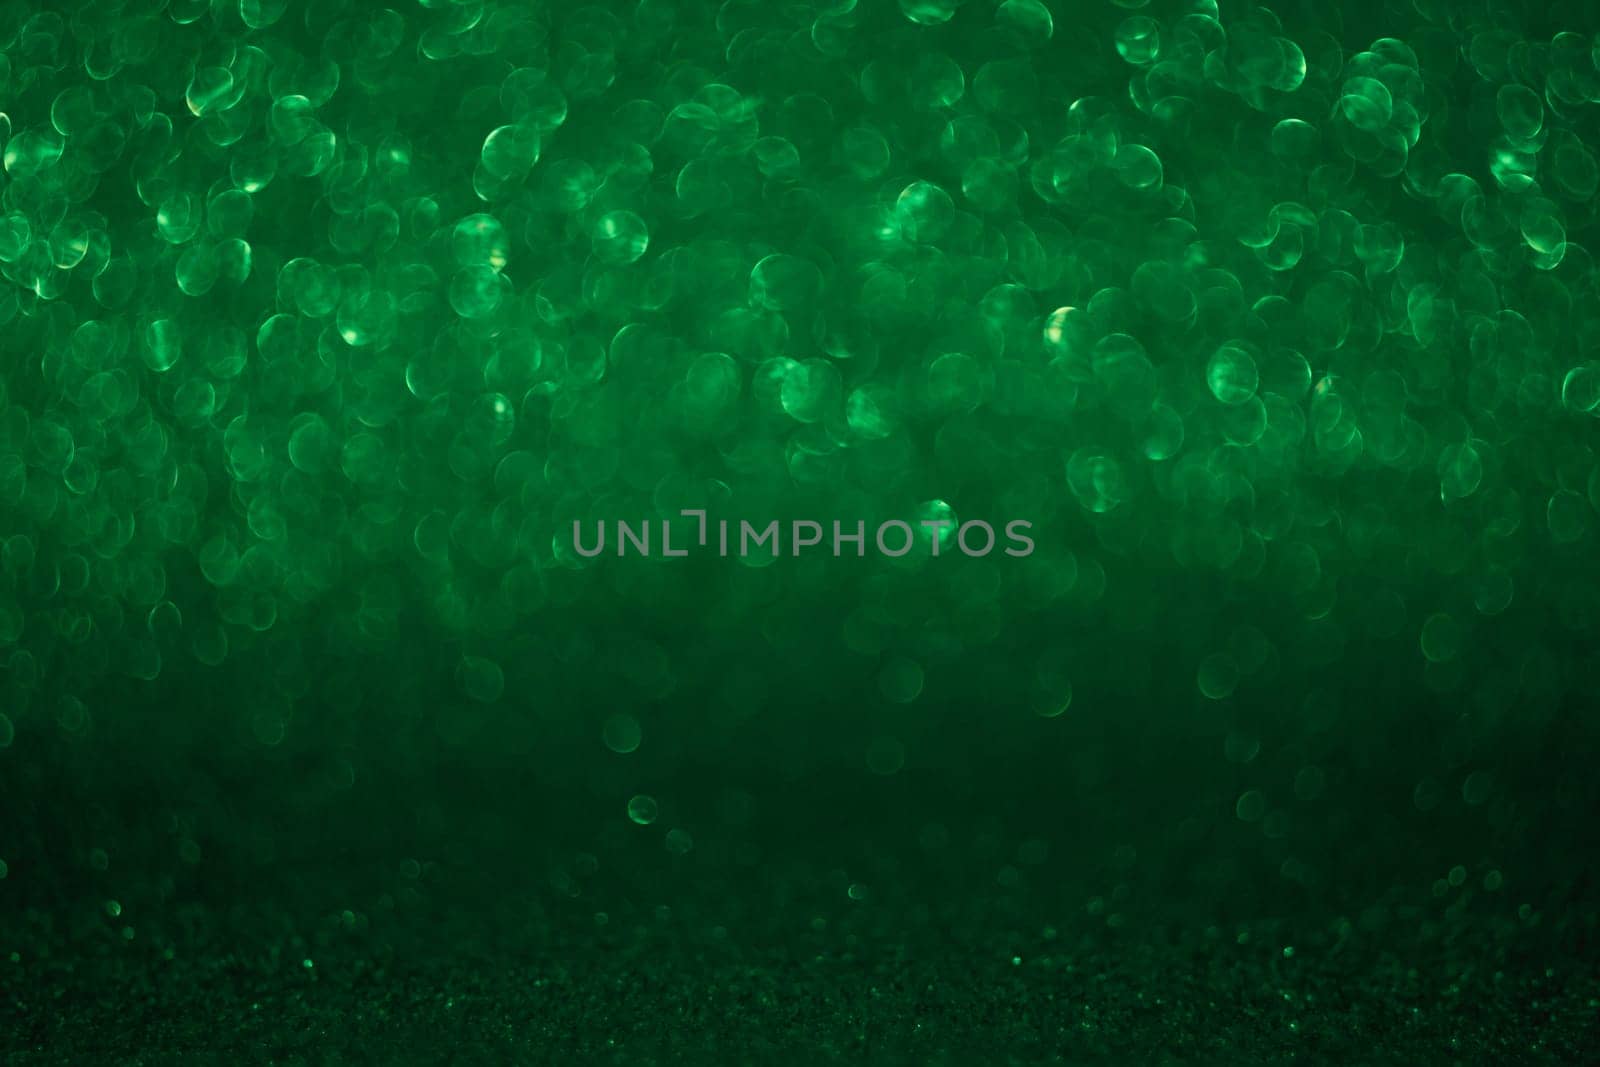 A vibrant green backdrop with a subtle, blurred green background, creating a harmonious and immersive visual experience.